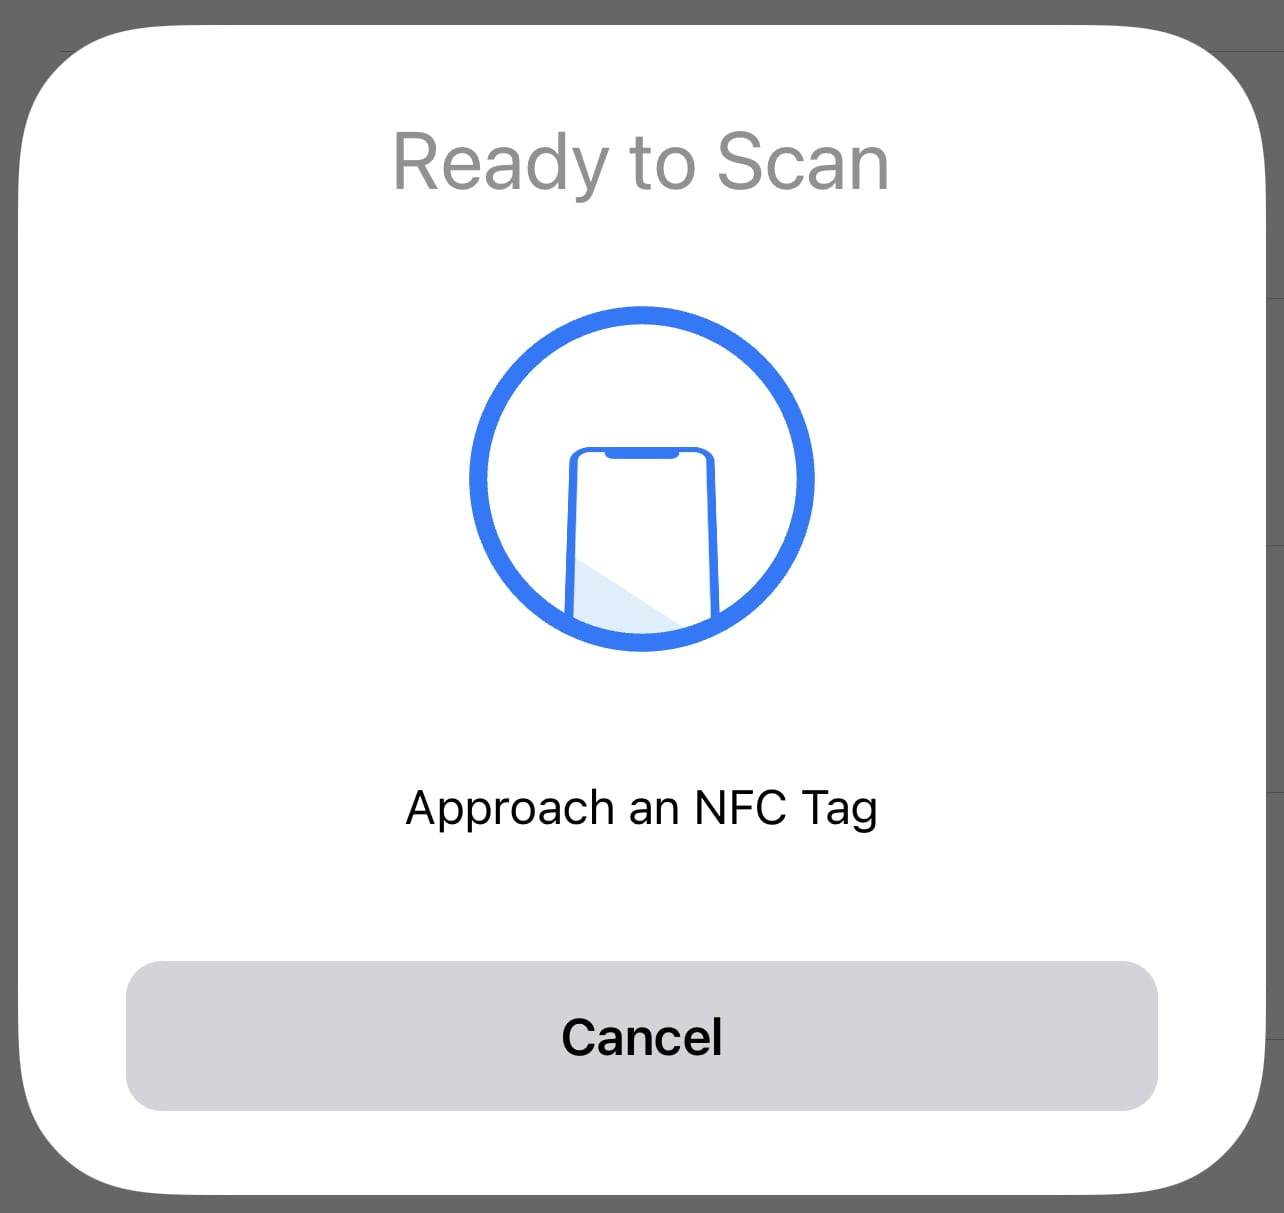 Bring the top of the iPhone to your NFC tag